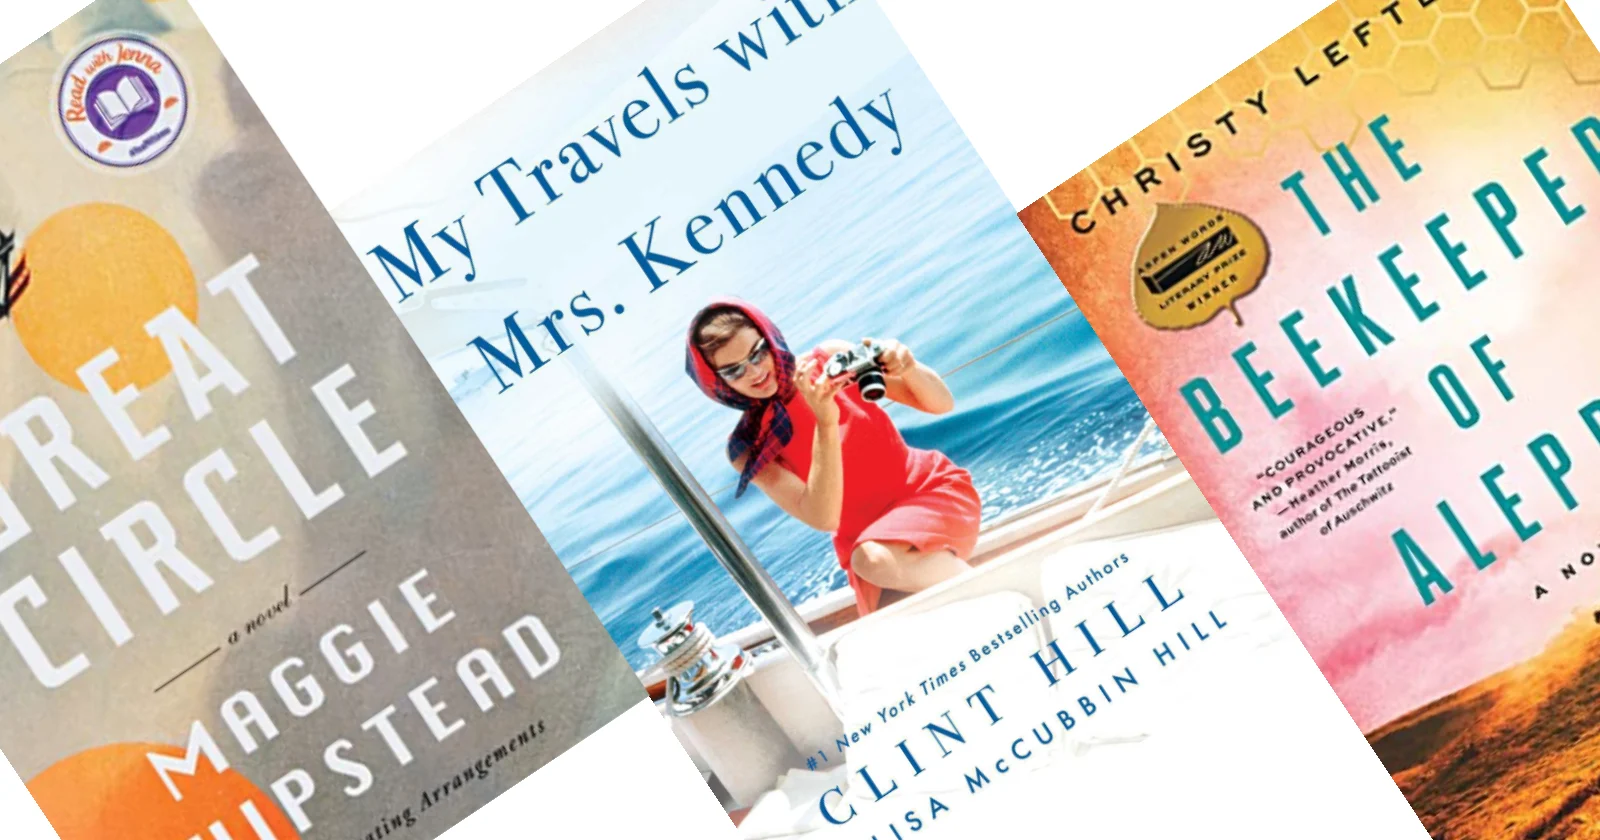 THree tilted book covers with picture of Jackie Kennedy on a ship on the center book.